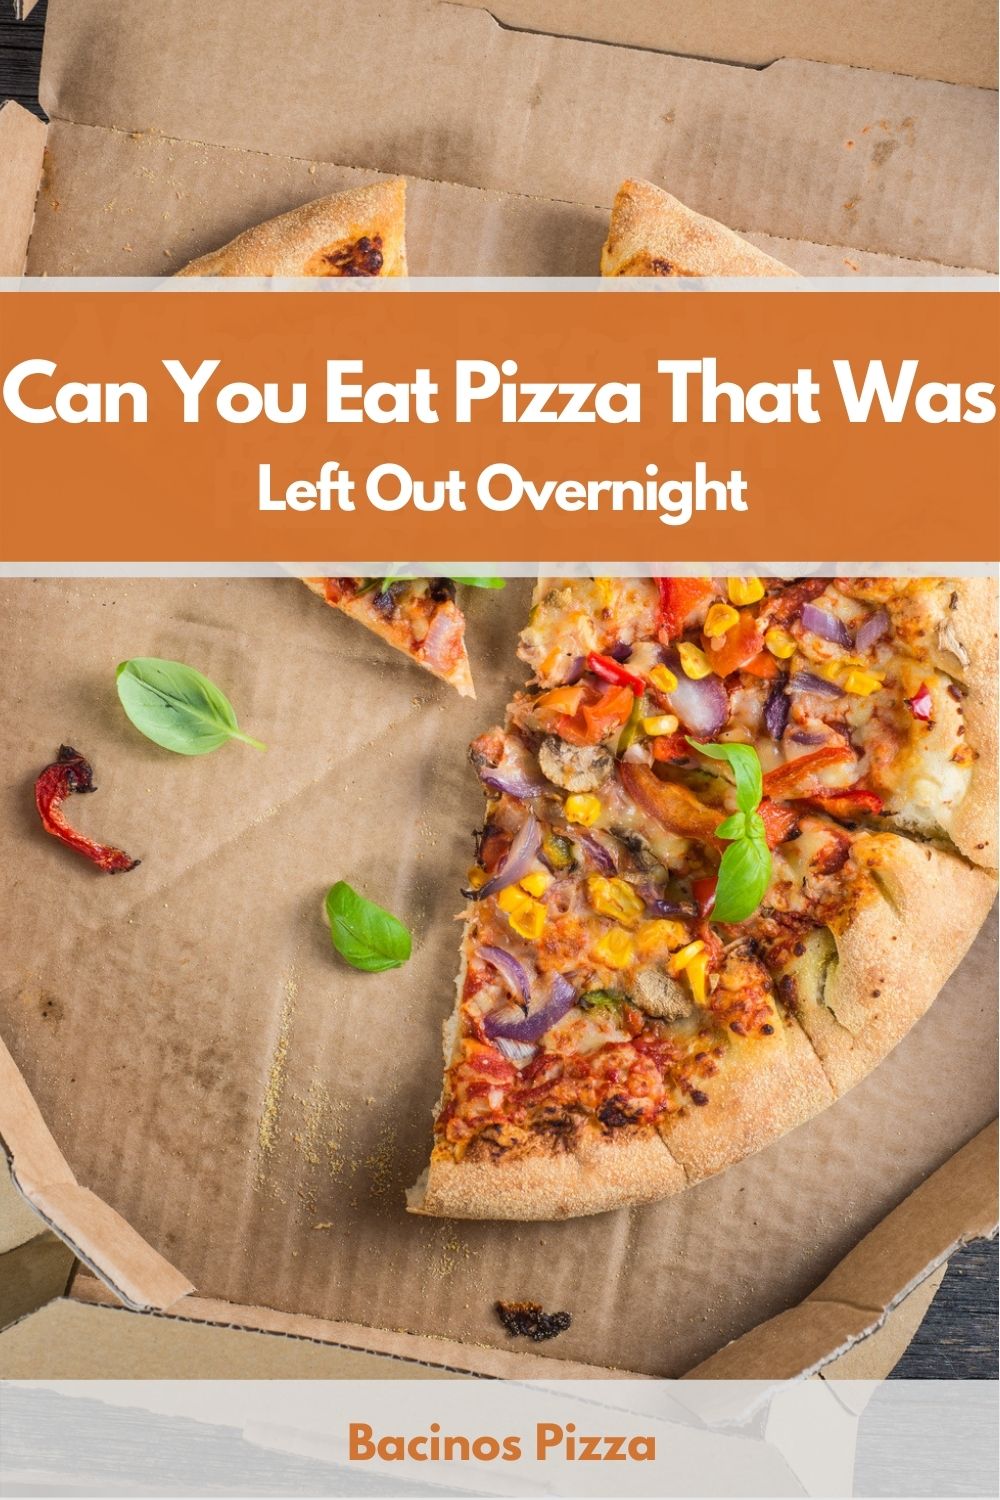 what-happens-if-you-eat-pizza-left-out-overnight-vending-business